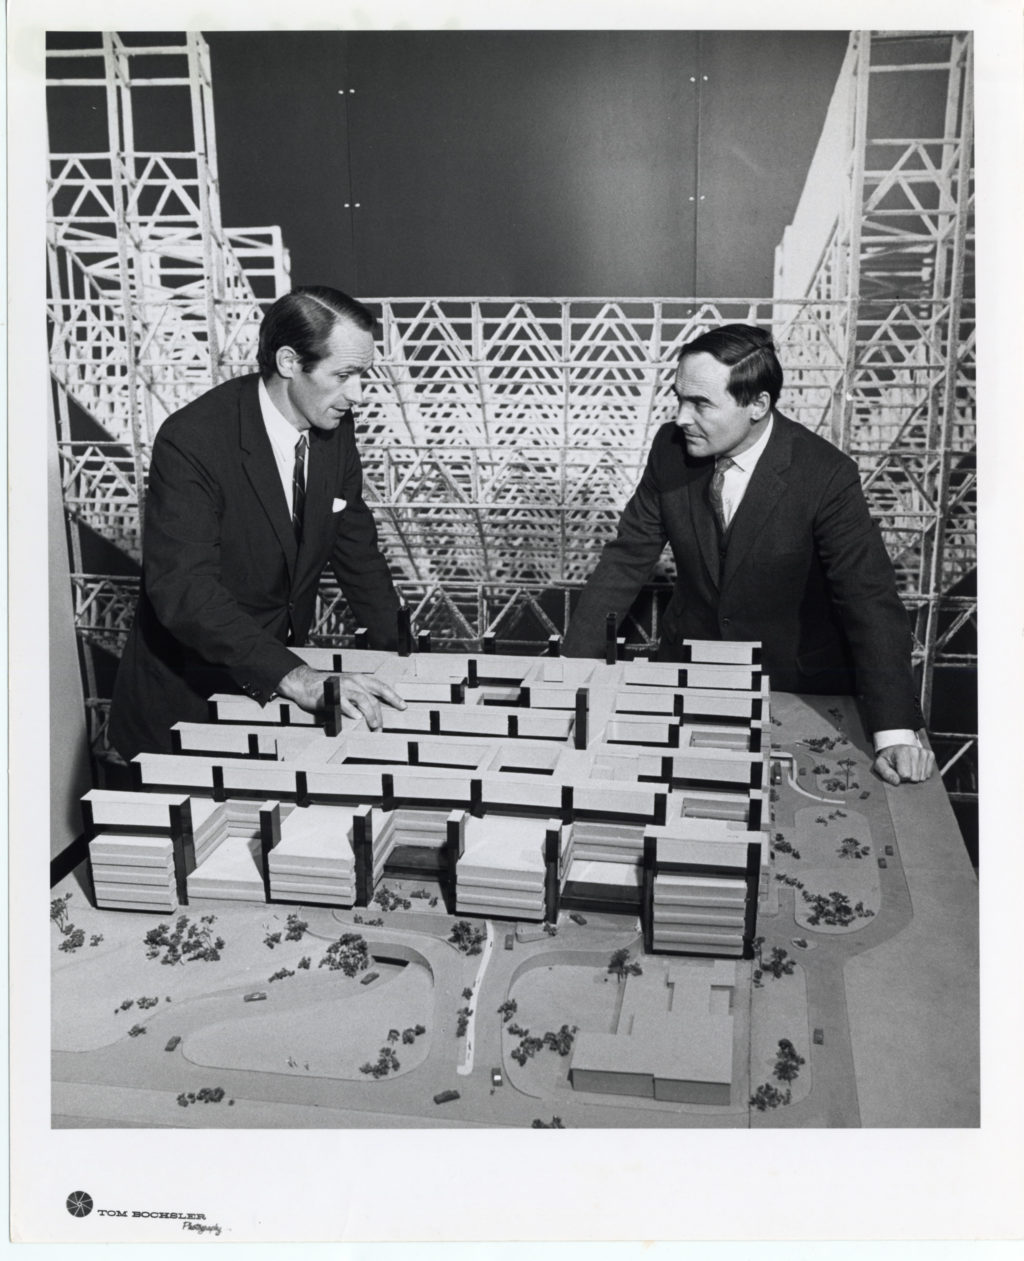 Black and white photograph showing two men in suits standing in front of a large architectural model made up of a grid of squares. Behind them, rows of scaffolding.